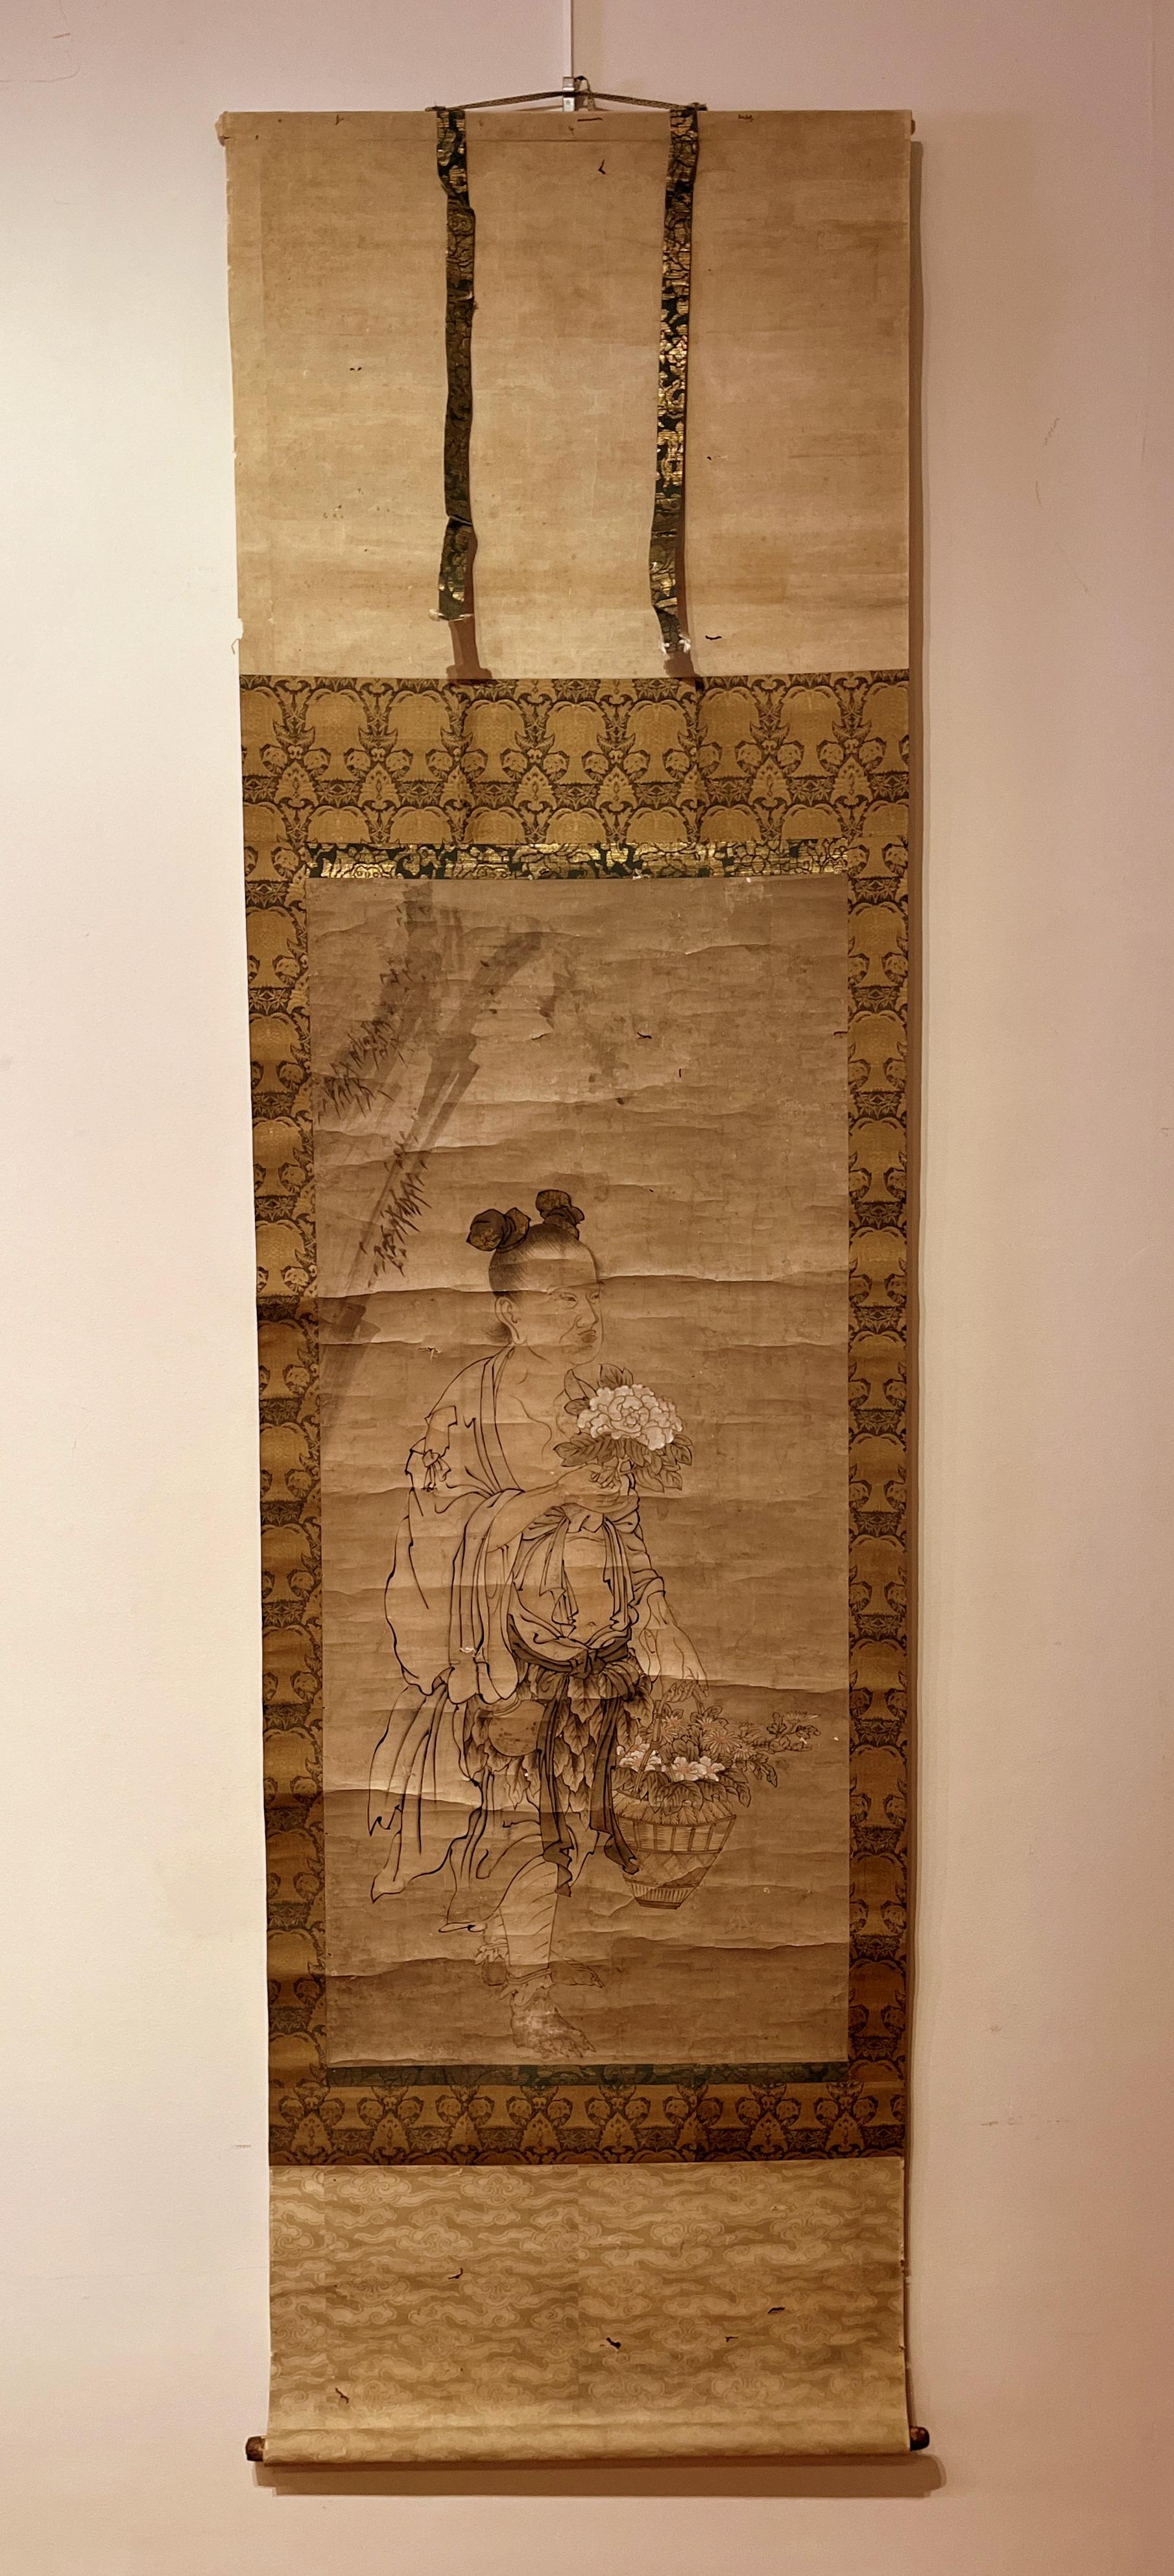 Japanese Scroll Painting of countryside person with  traditional dress carry basket of flowers
Ink on paper mounted on a scroll
Overall size:  78